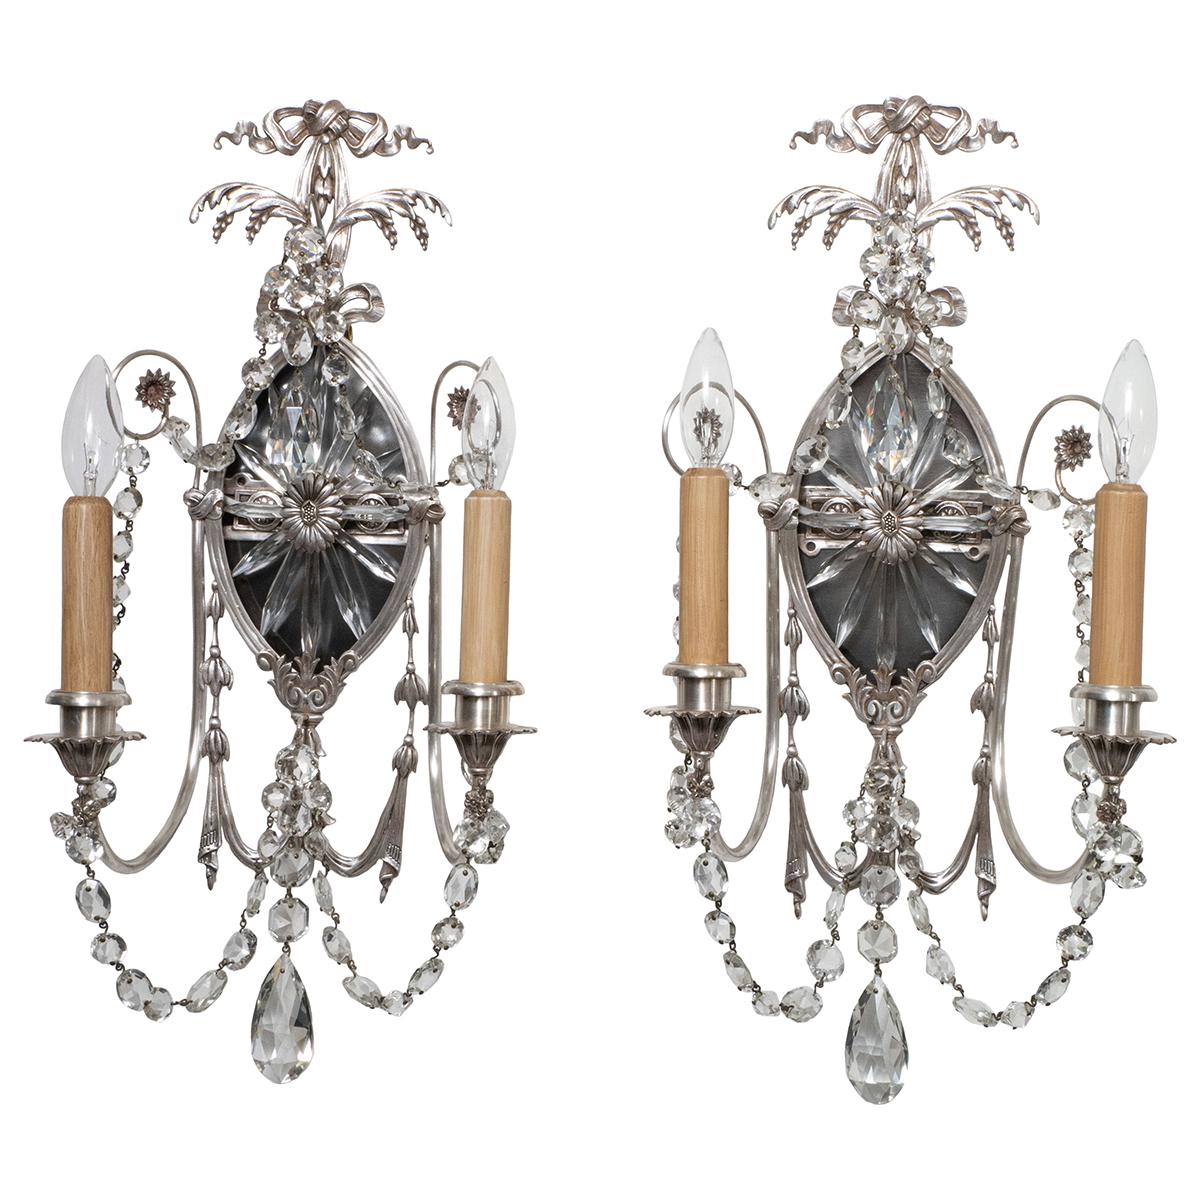 Regency Revival Wall Lights and Sconces